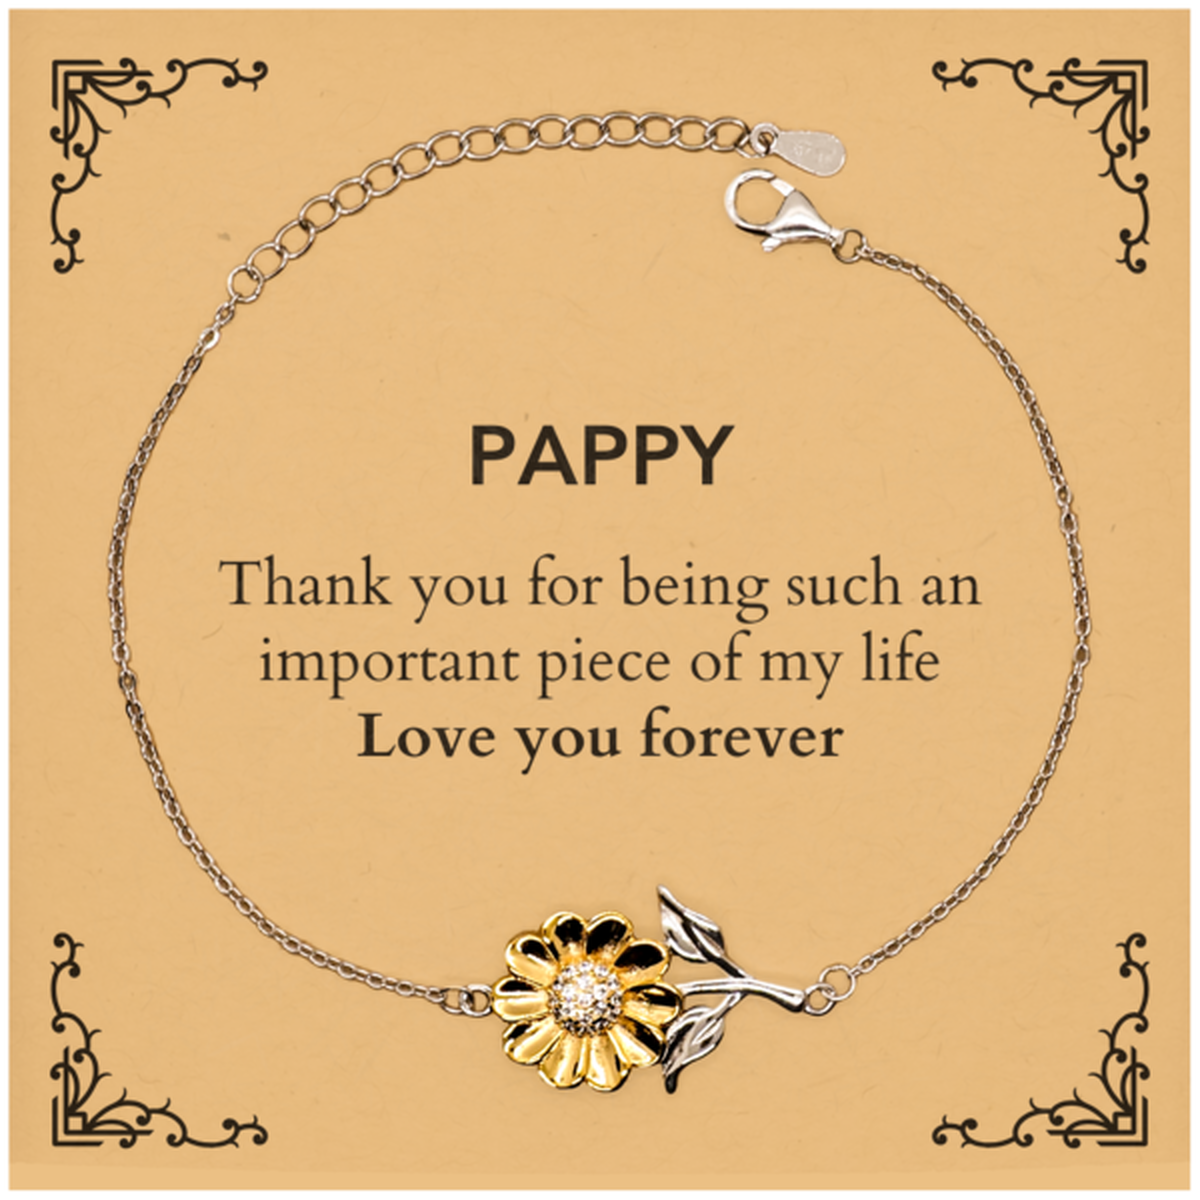 Appropriate Pappy Sunflower Bracelet Epic Birthday Gifts for Pappy Thank you for being such an important piece of my life Pappy Christmas Mothers Fathers Day